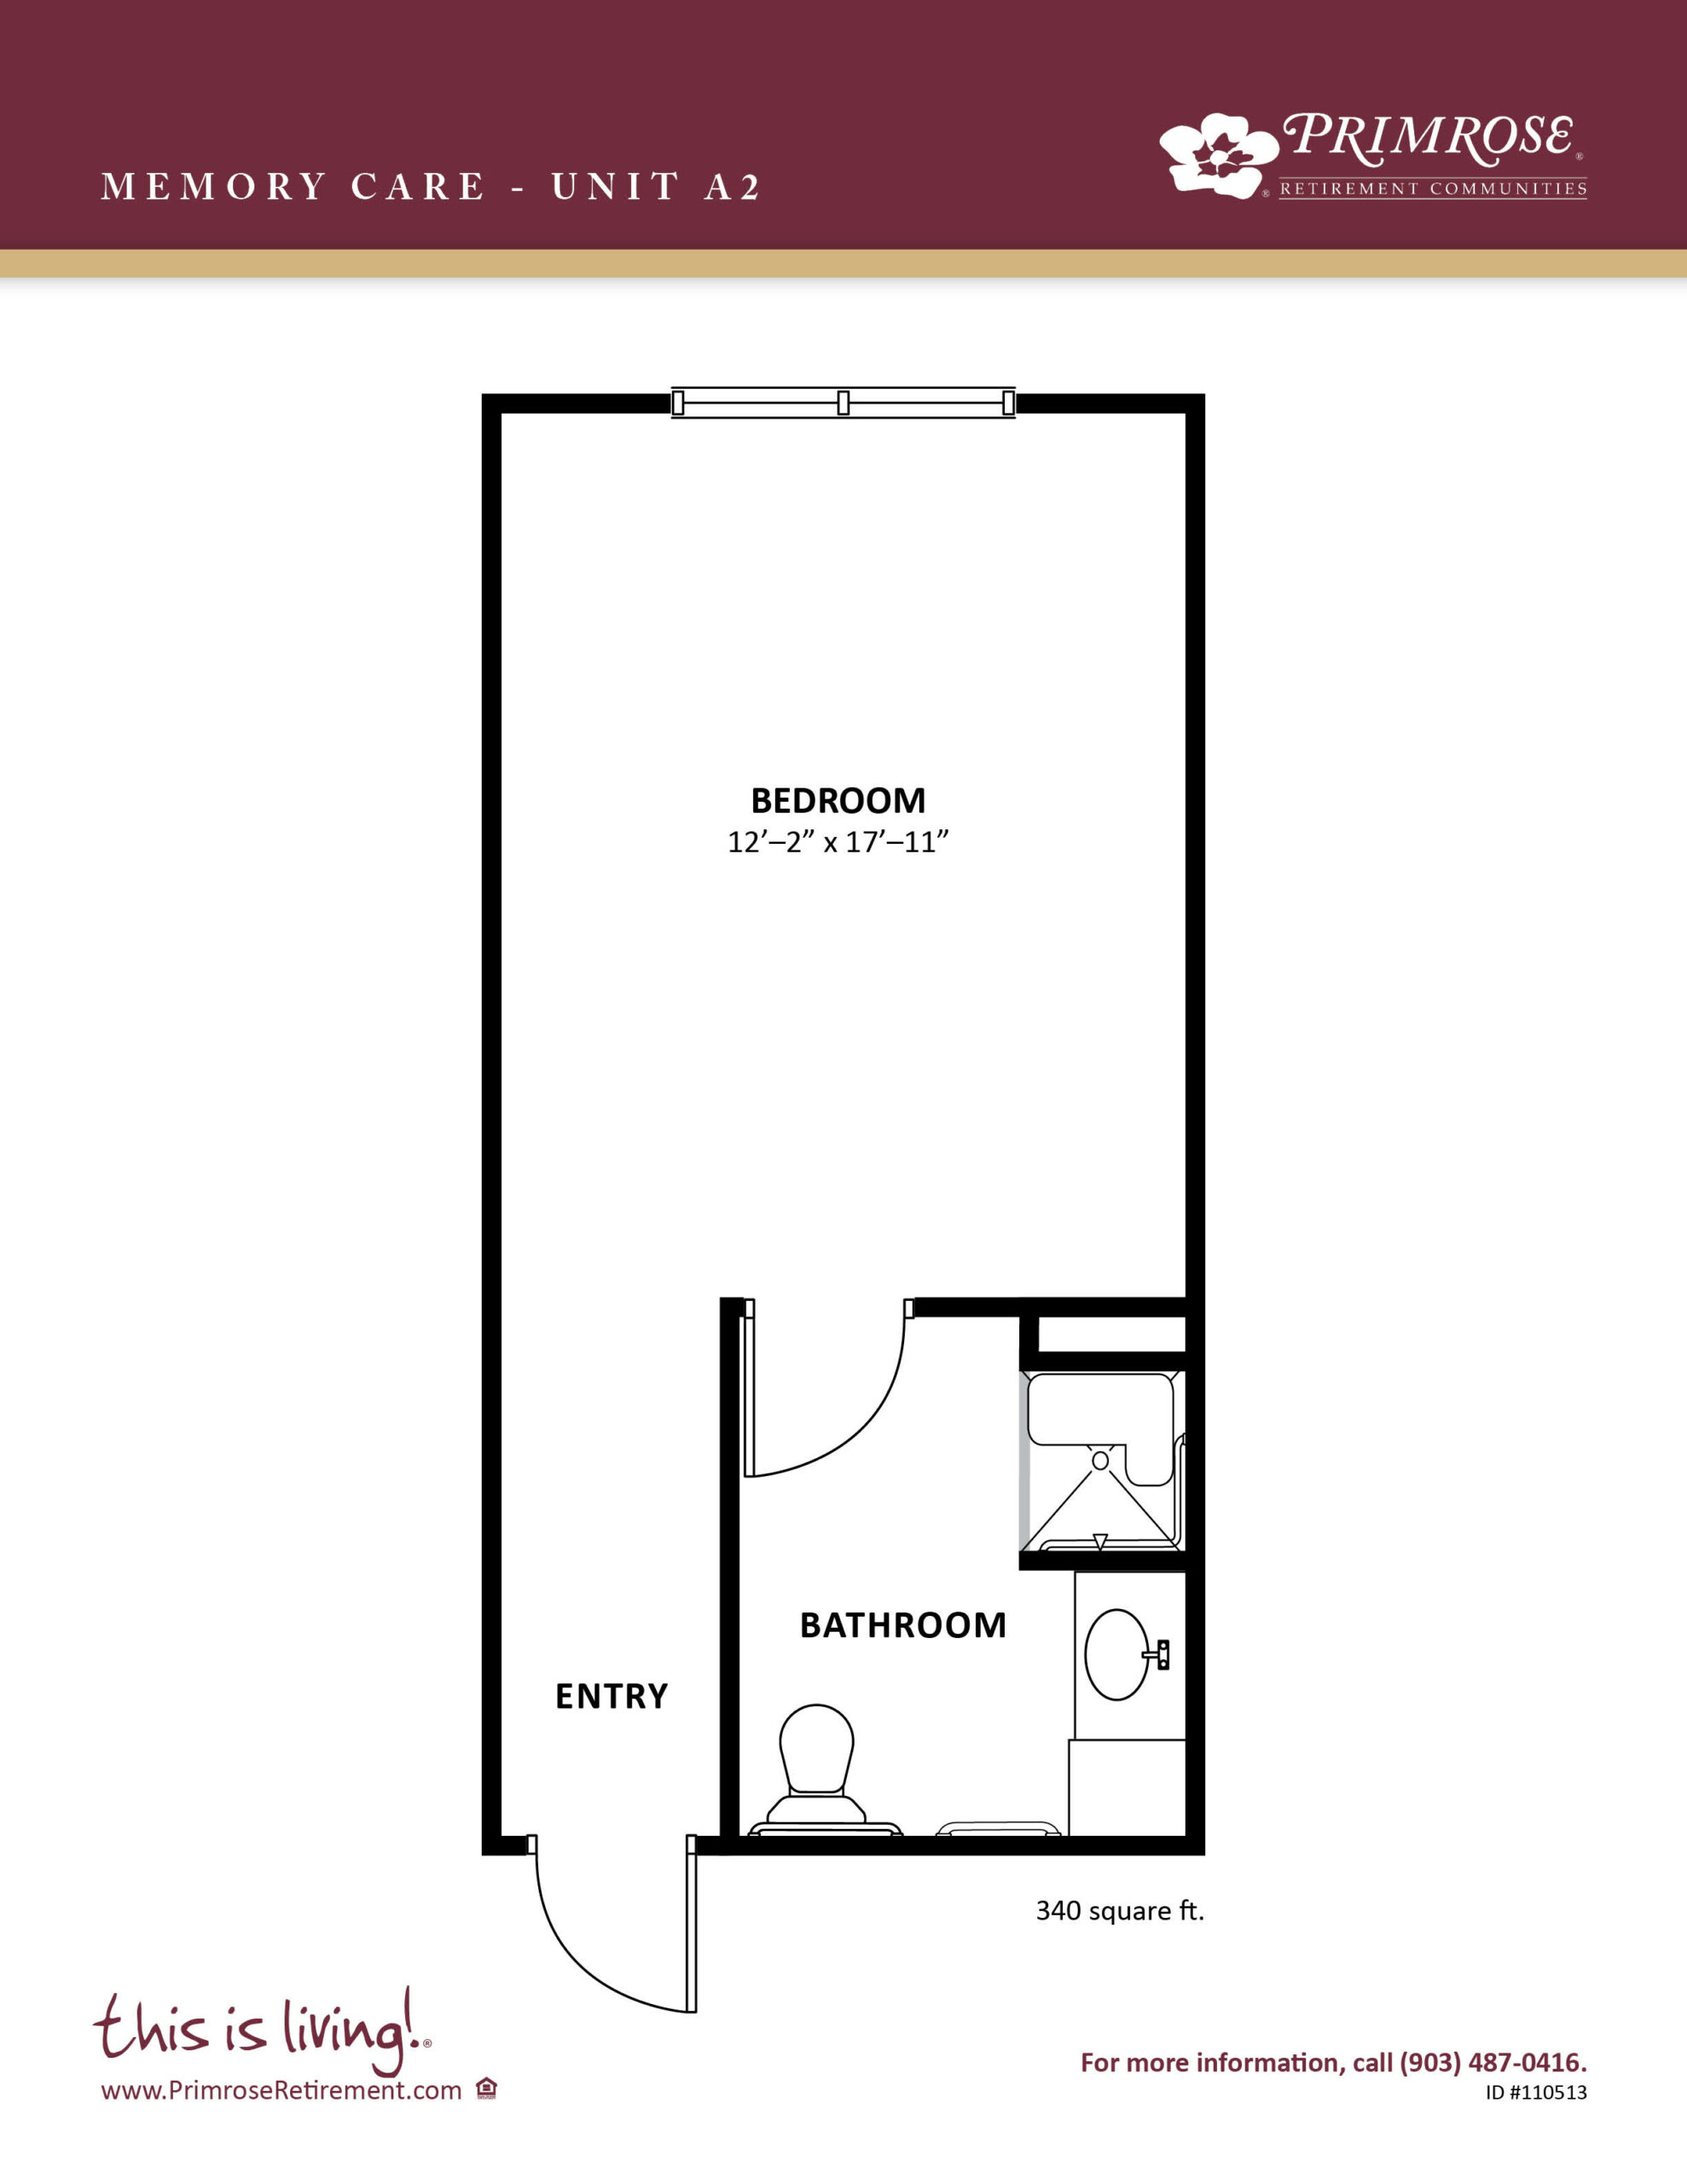 Primrose of Tyler floor plan for the one bedroom, one bath apartment with 340 sq ft